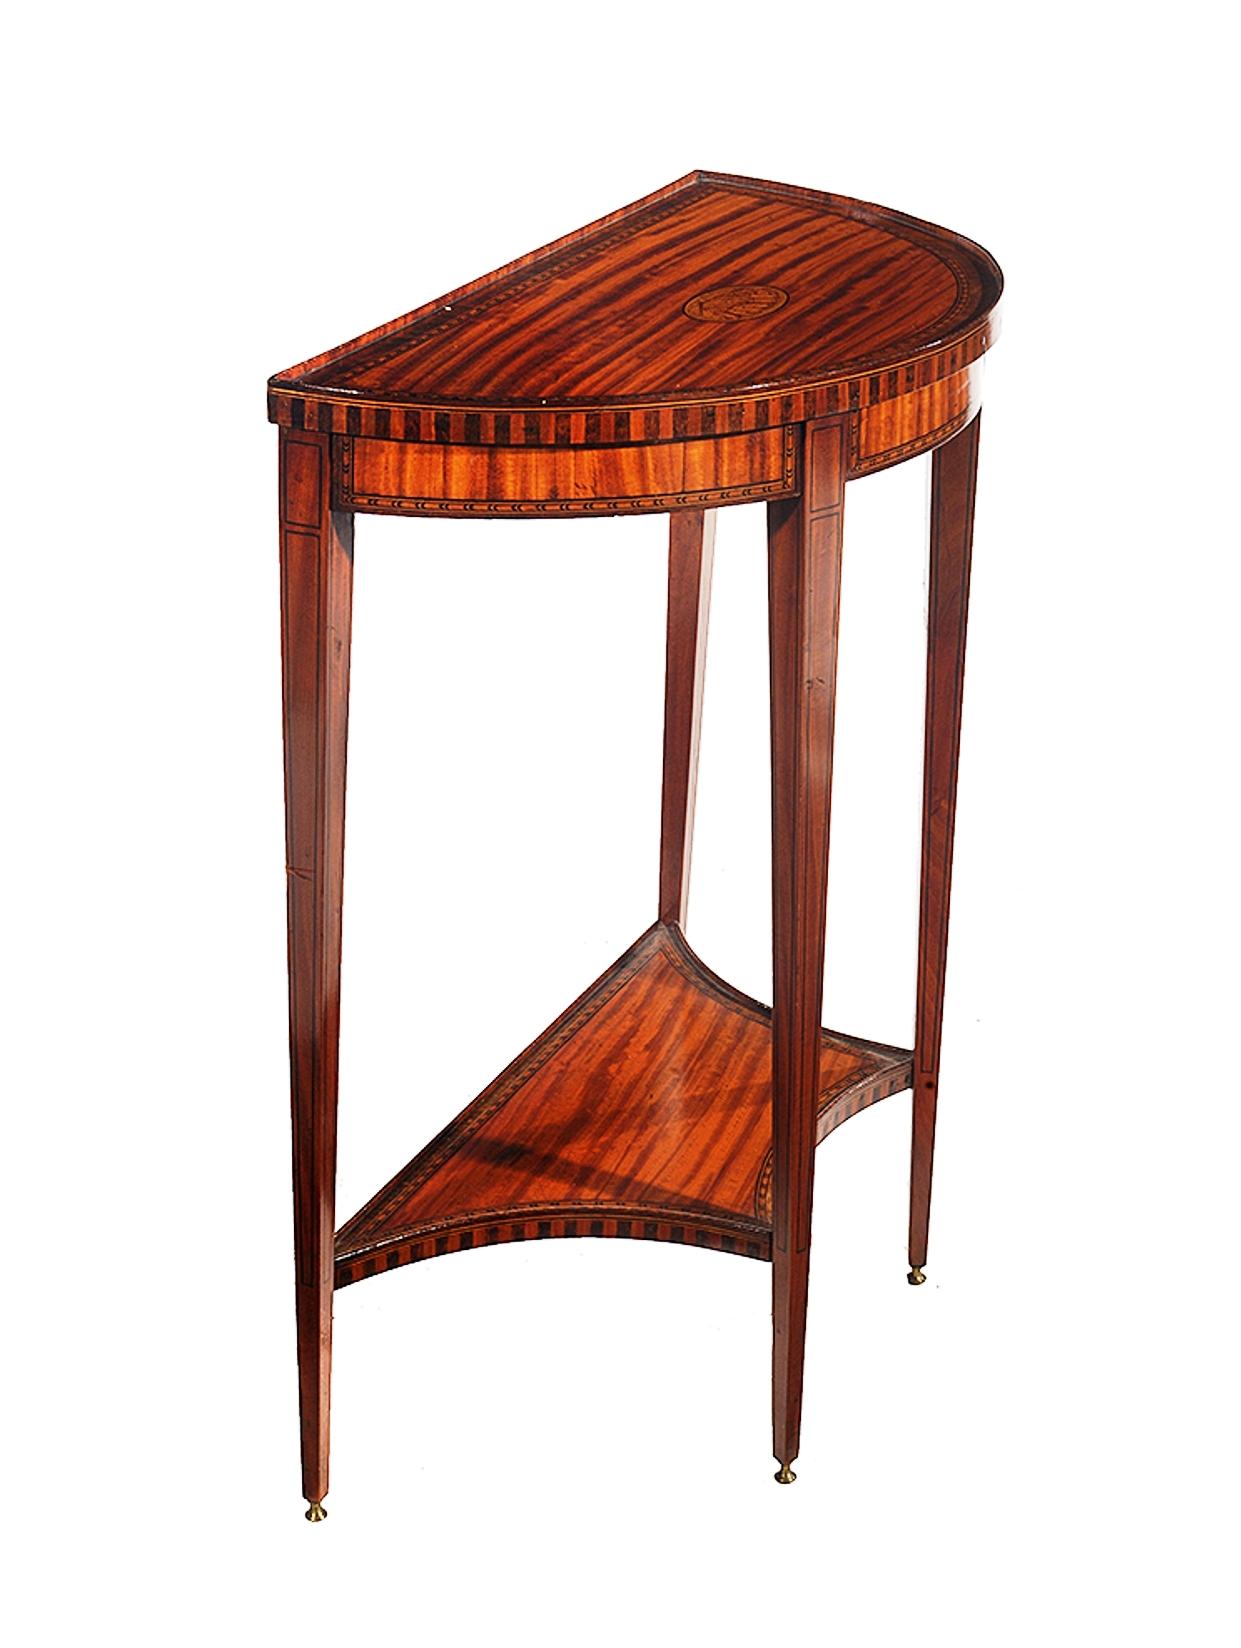 An unusually small demilune satinwood and marqetary console table.
The top with a raised satinwood parqetary gallery and a central satinwood marquetry shell motif
The whole raised on slender square tapering legs that end on small brass feet.